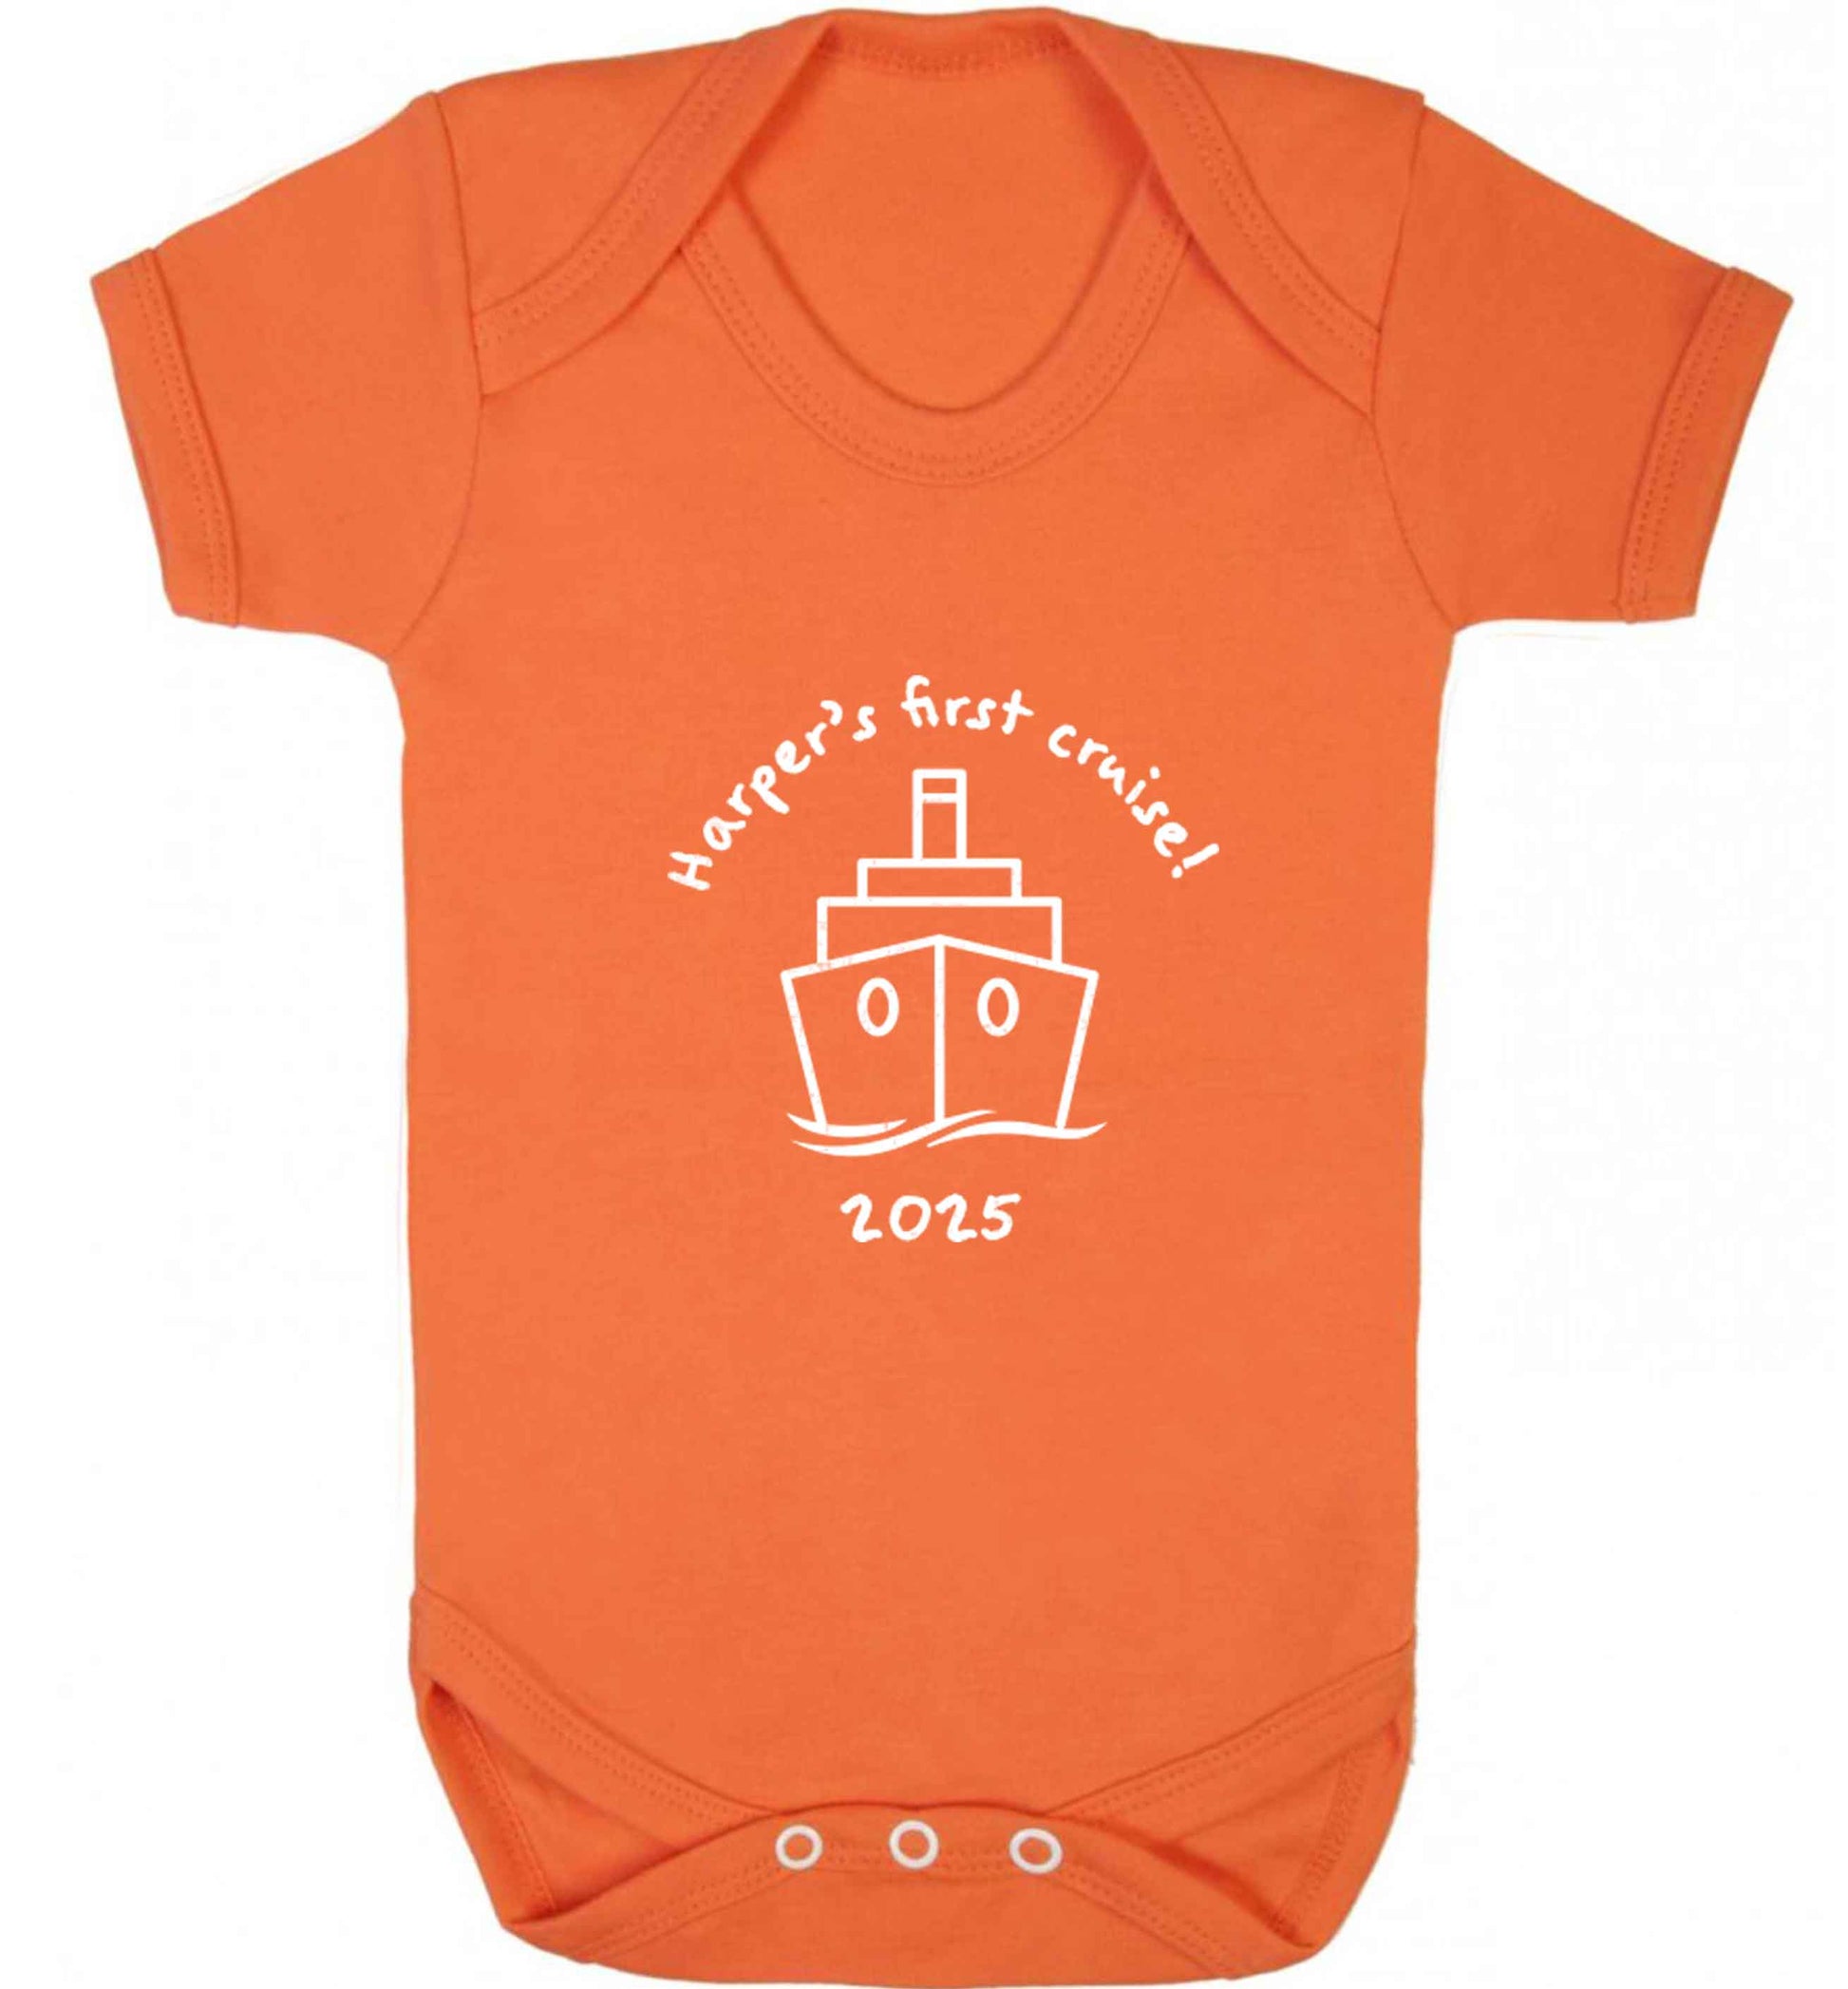 Personalised first cruise baby vest orange 18-24 months